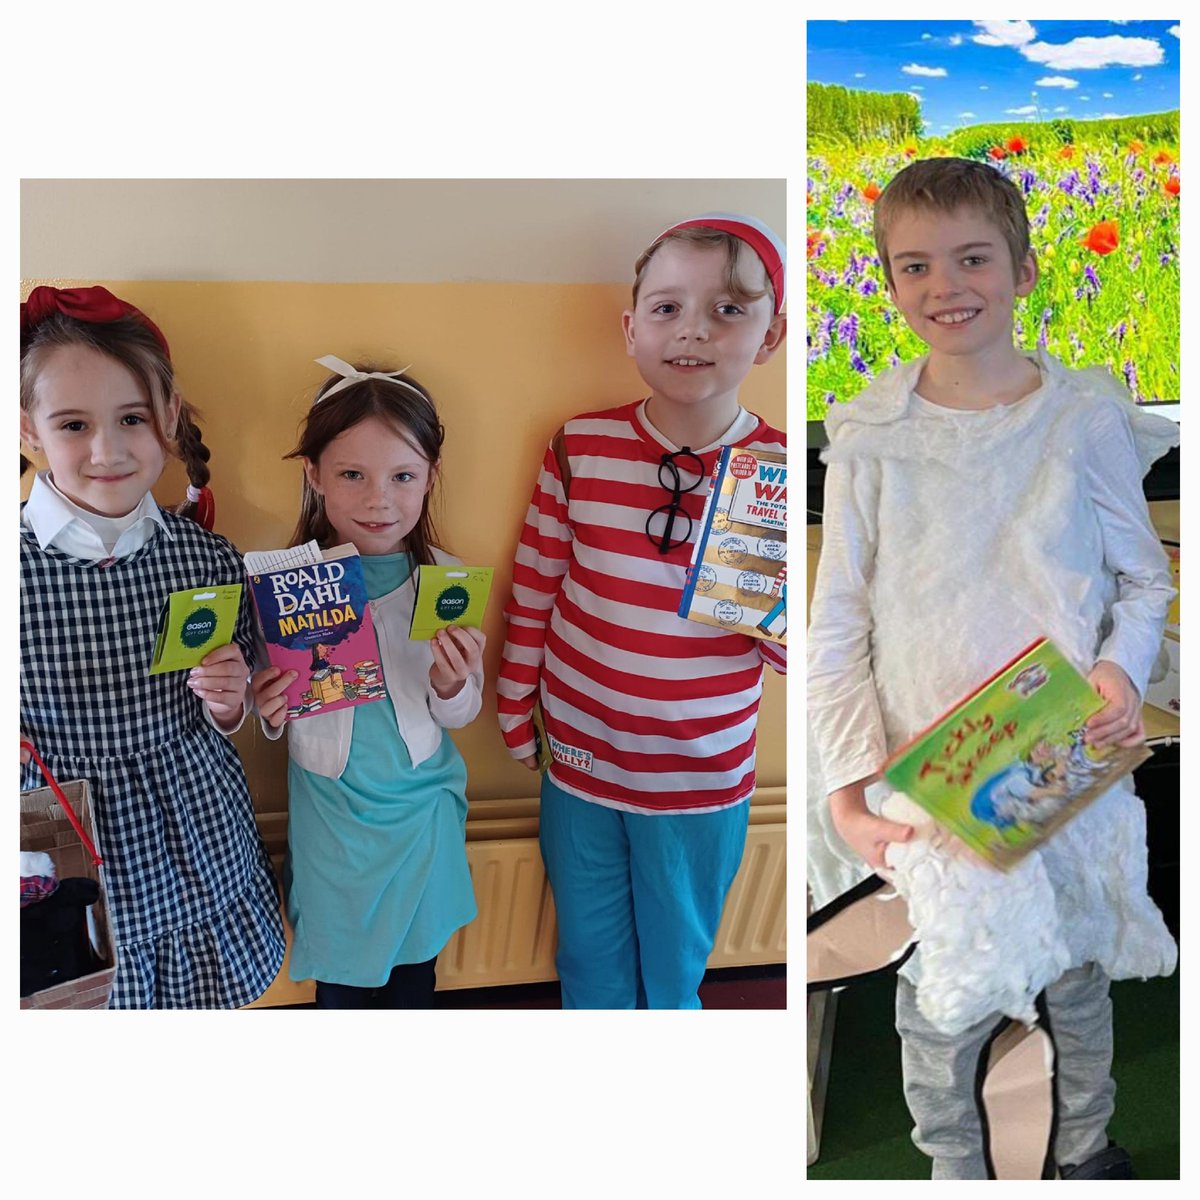 Well done to our fantastic 'World Book Day Character Dress-Up ' winners. Some very imaginative and creative costumes were on display last Thursday. 👌 📚 And a special thank you to Mrs Cummins for organising a full filled day for all the students. 👏🏽 @WorldBookDayIE